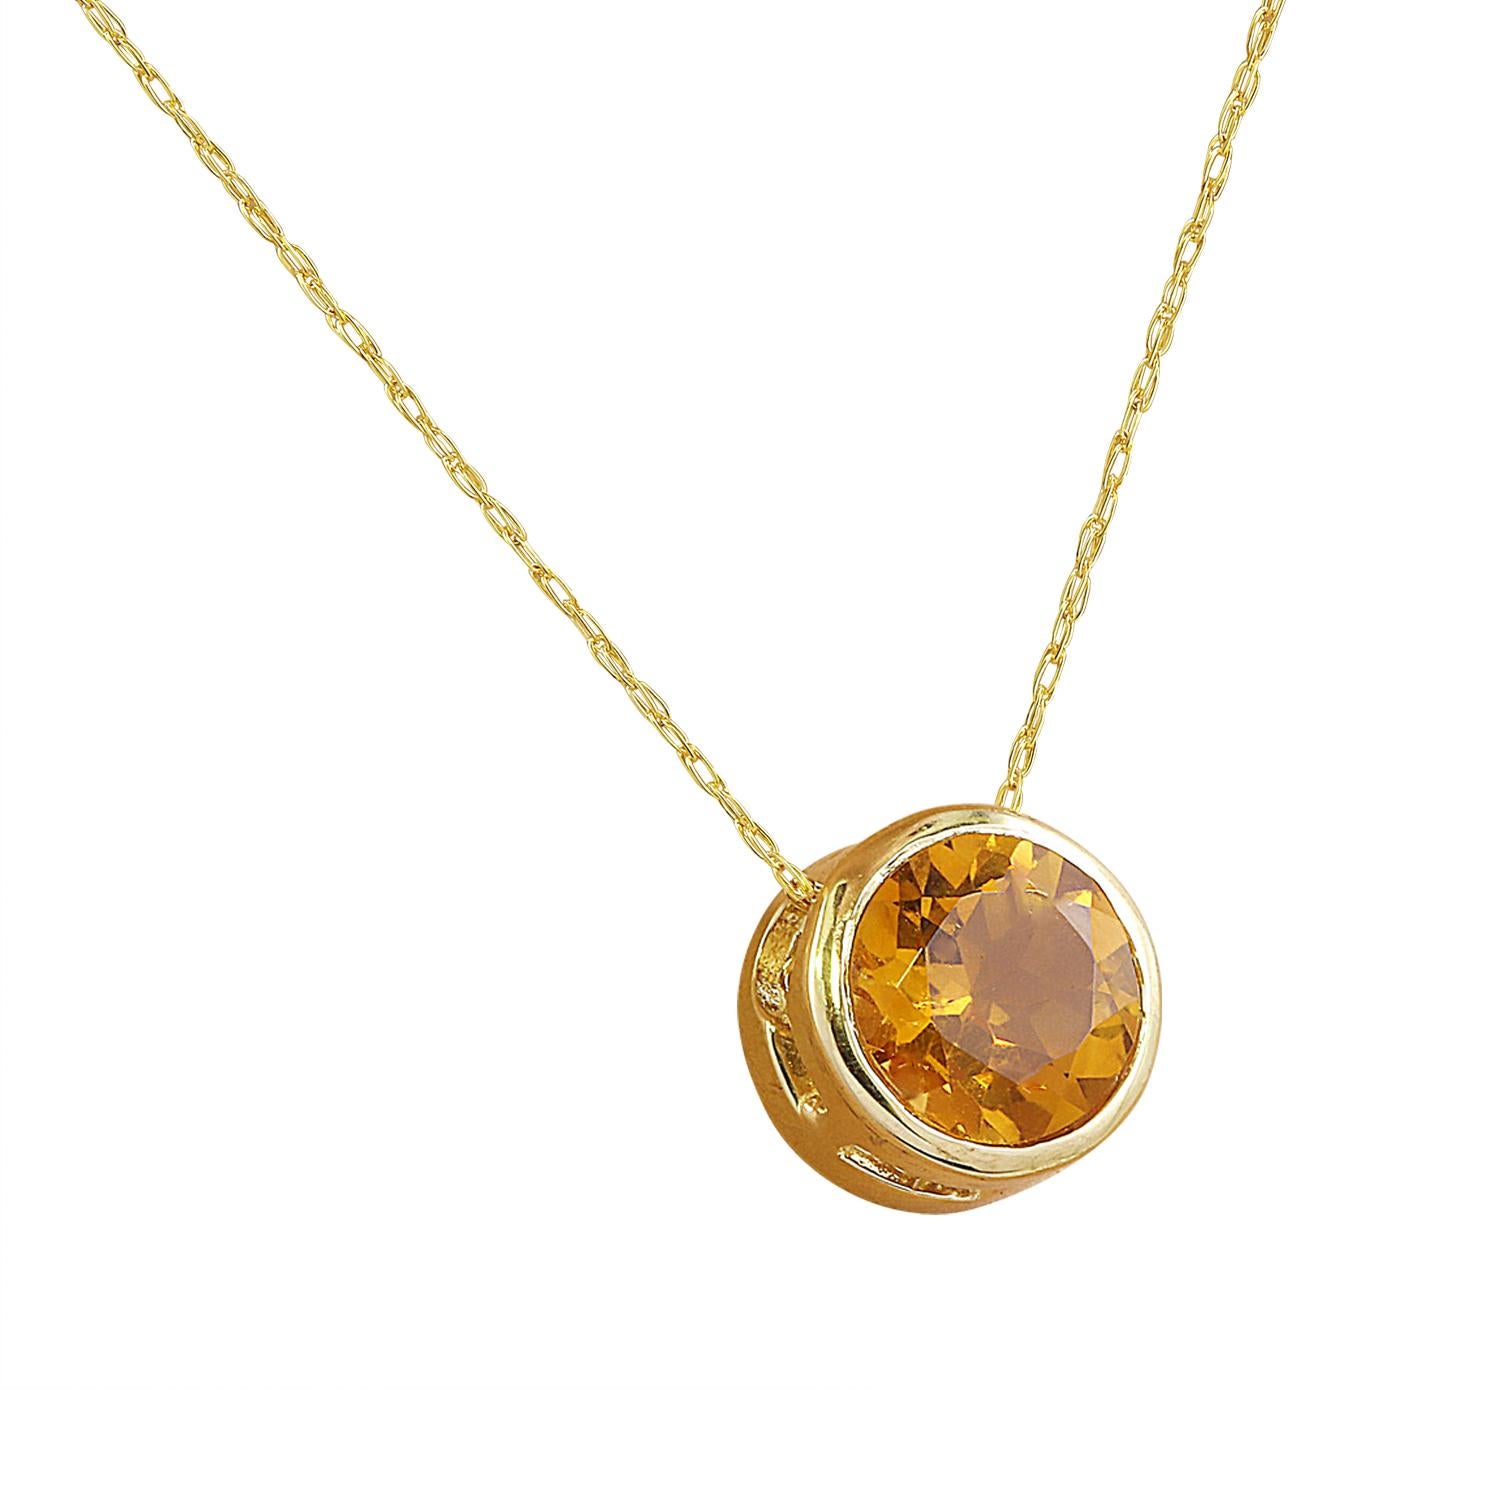 1.50 Carat Citrine 14K Yellow Gold Necklace
Stamped: 14K
Total Necklace Weight: 1.4 Grams
Length: 16 Inches
Citrine Weight: 1.50 Carat (6.50x6.50 Millimeters)
Treatment: Heating
Face Measures: 8.20x8.20 Millimeters 
SKU: [600193]